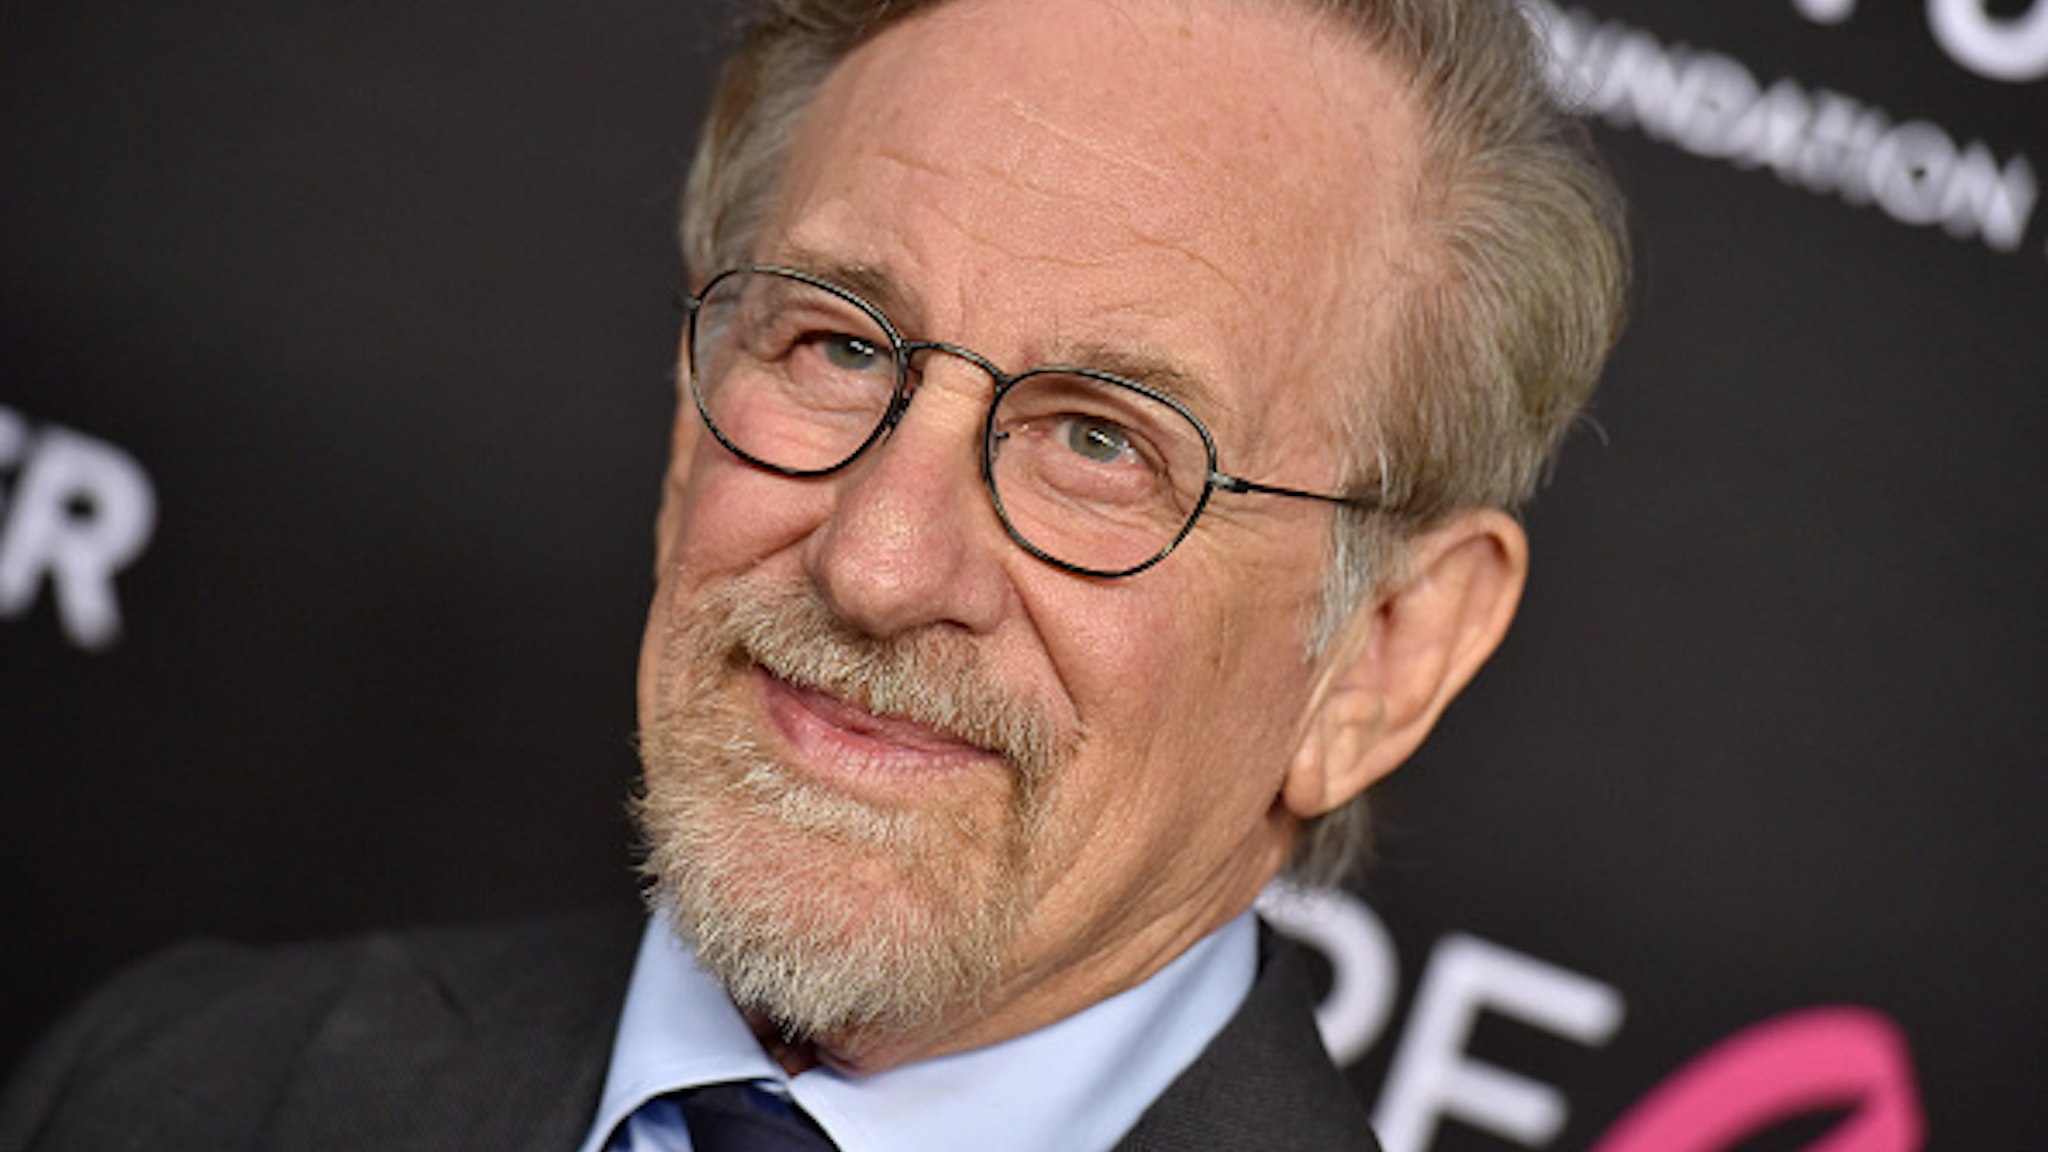 BEVERLY HILLS, CALIFORNIA - FEBRUARY 28: Steven Spielberg attends The Women's Cancer Research Fund's An Unforgettable Evening Benefit Gala at the Beverly Wilshire Four Seasons Hotel on February 28, 2019 in Beverly Hills, California.